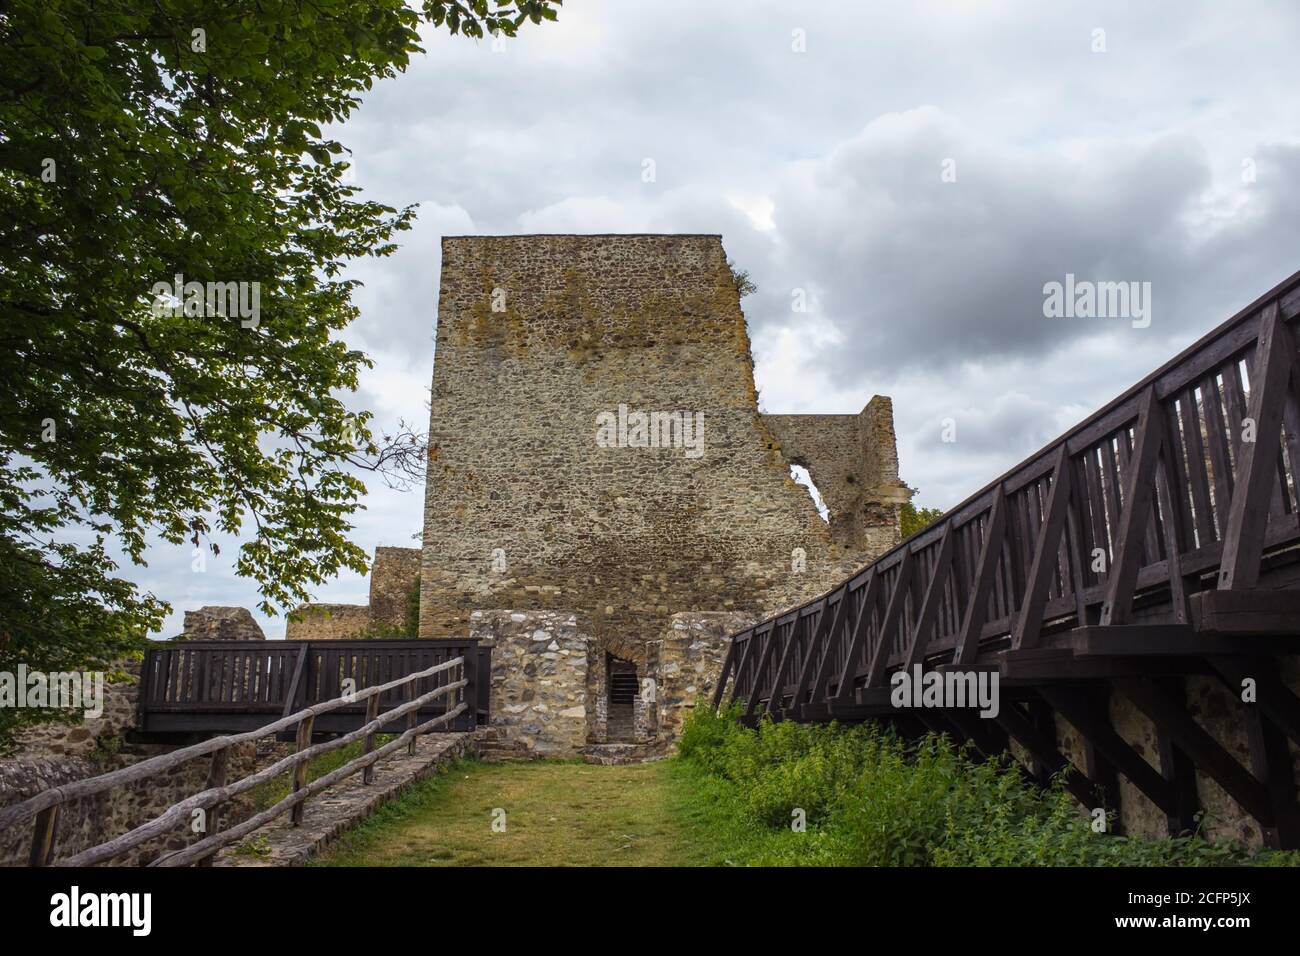 The tower of the castle Cornstejn, cultural monument in the Czech Republic Stock Photo